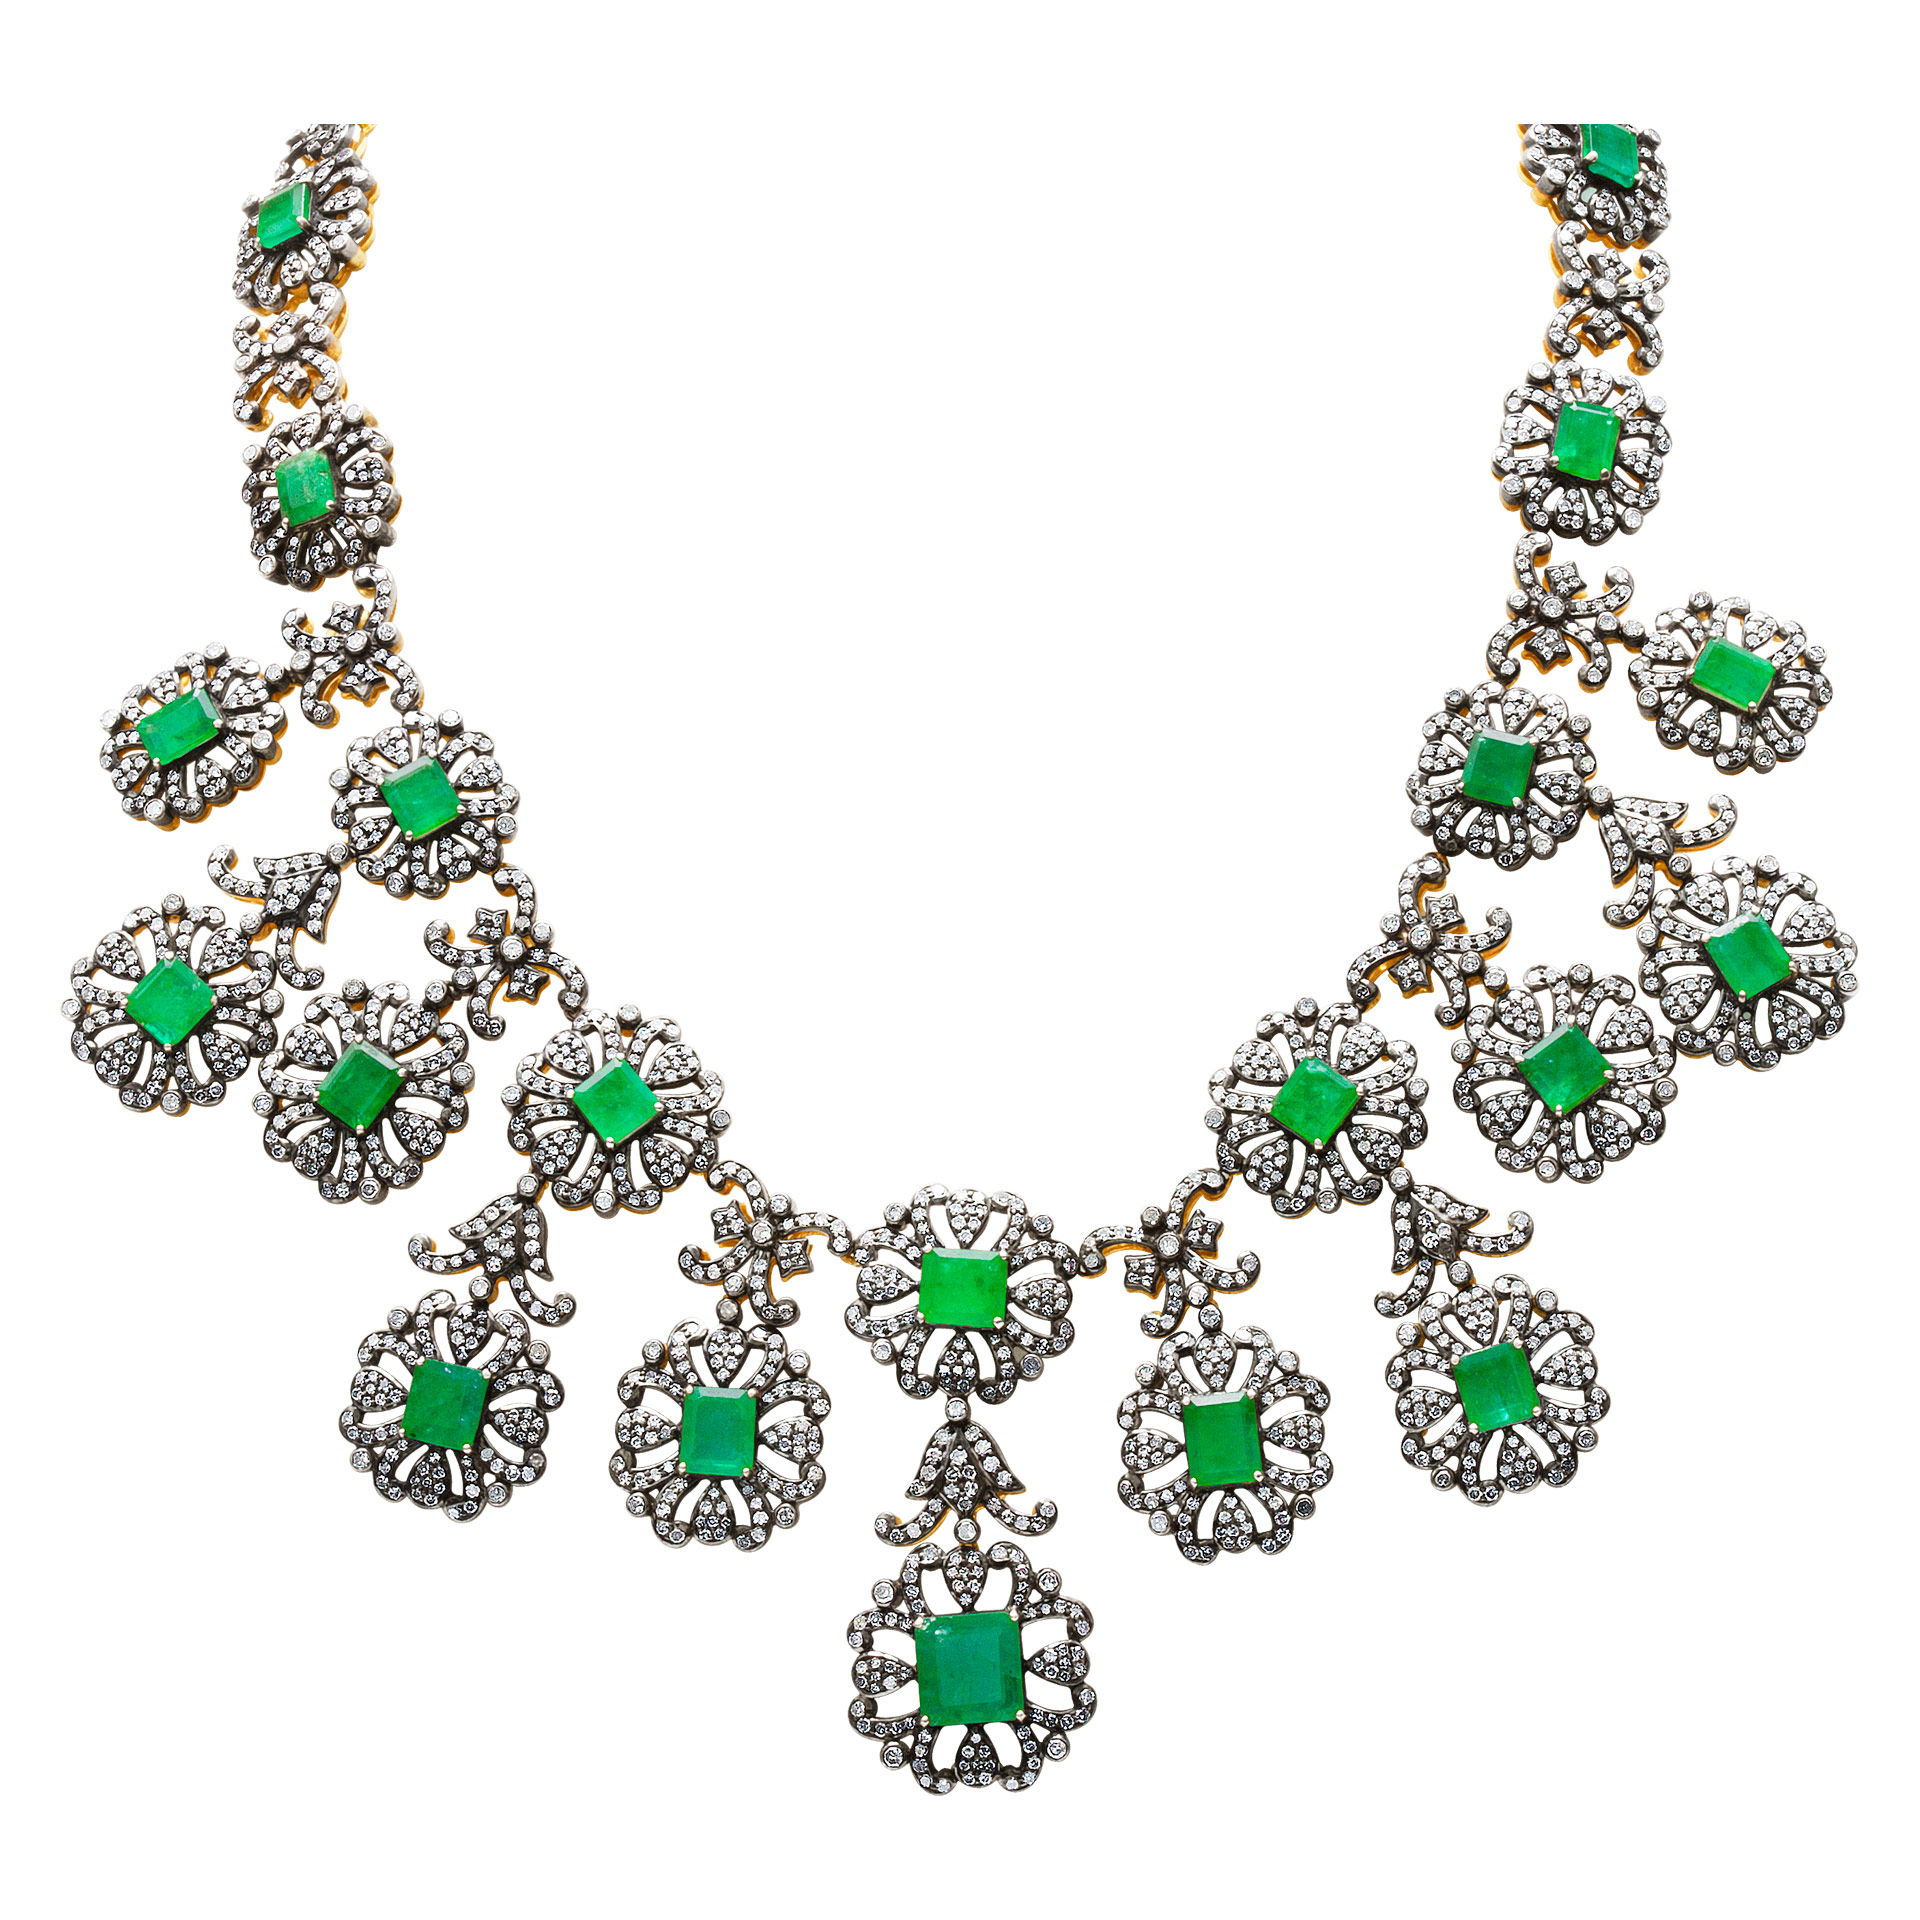 Emerald & rose cut diamond bib necklace in 14k with silver top, 21.24 cts in diamonds & 33.37 cts  in emeralds image 1